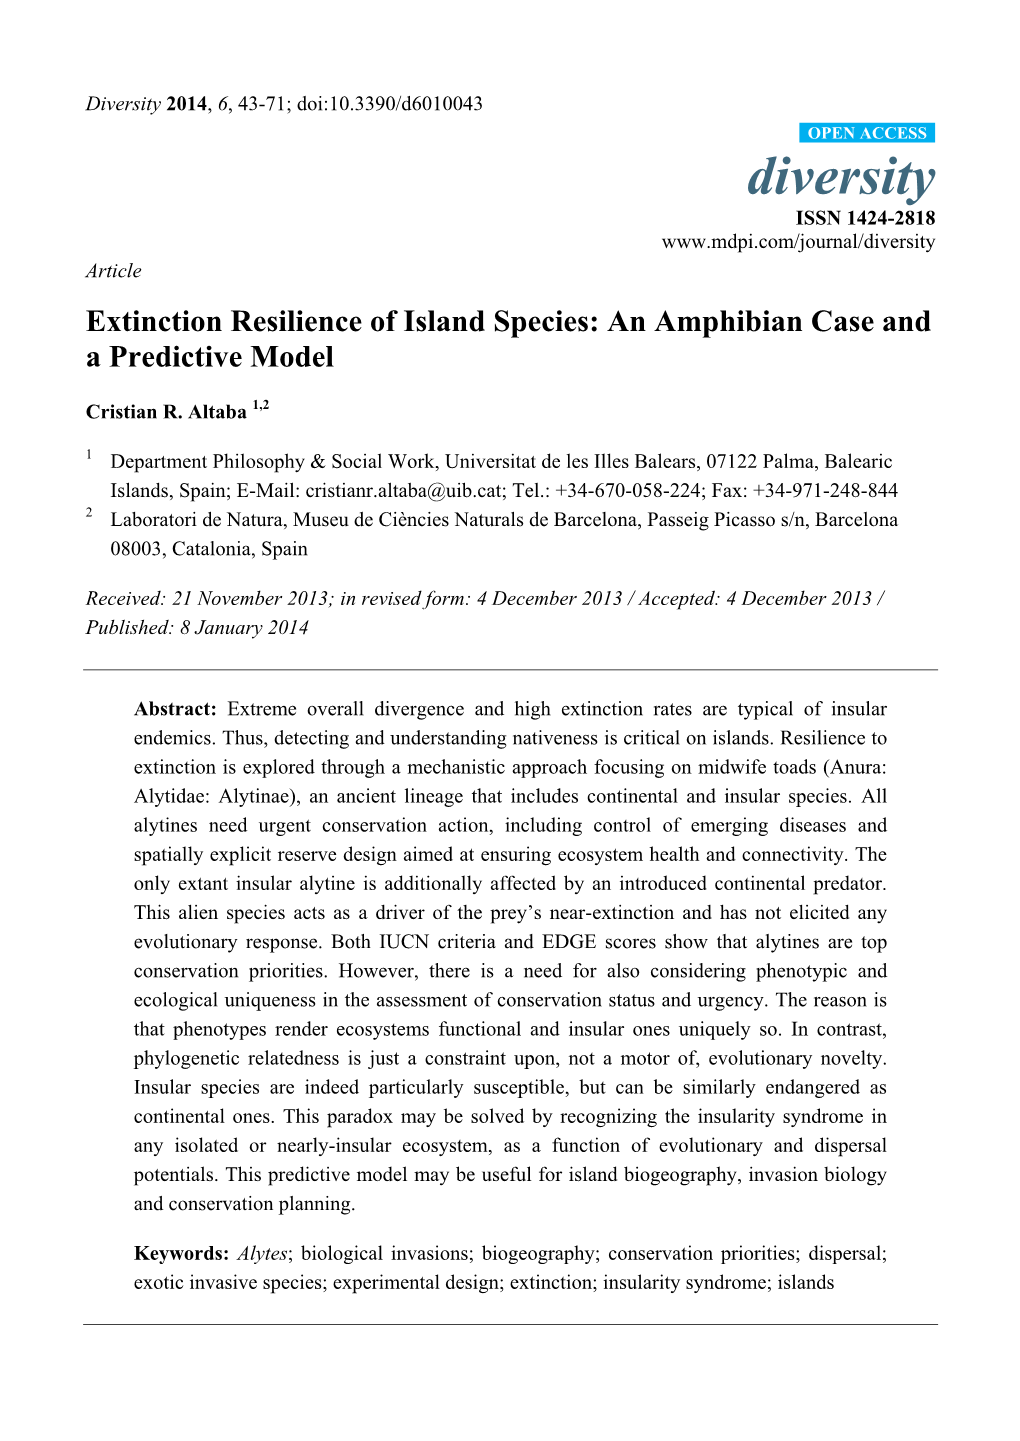 Extinction Resilience of Island Species: an Amphibian Case and a Predictive Model